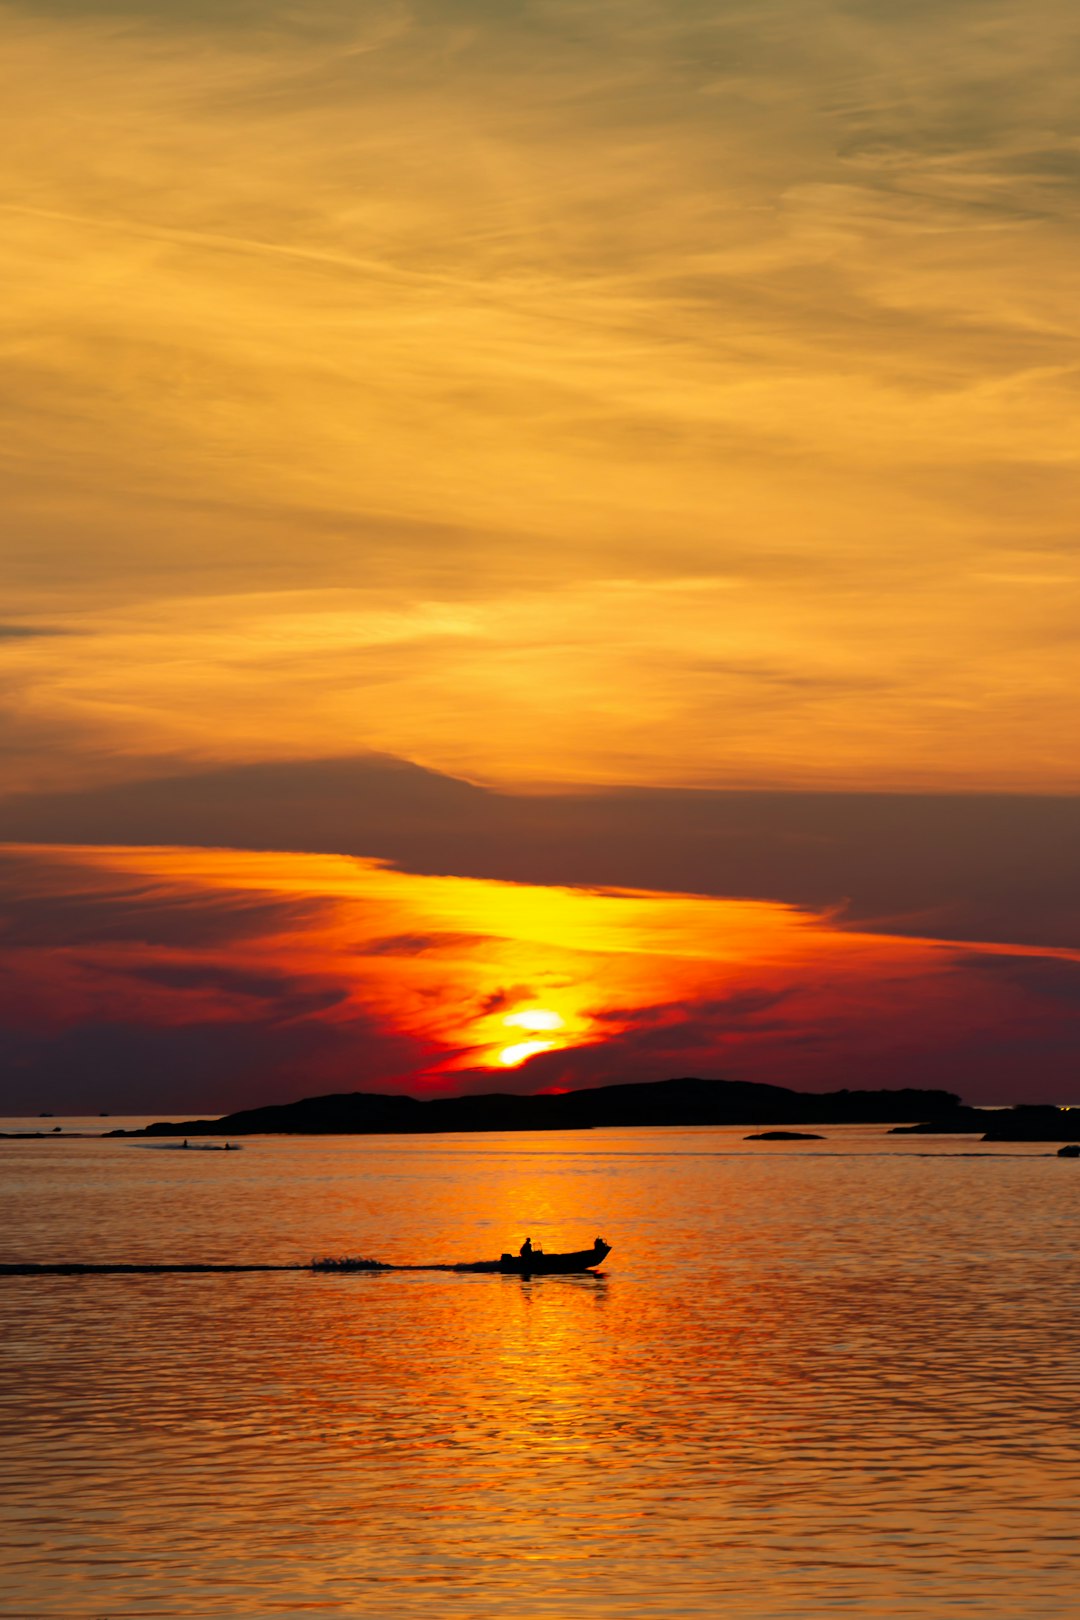 silhouette of 2 people riding on boat during sunset